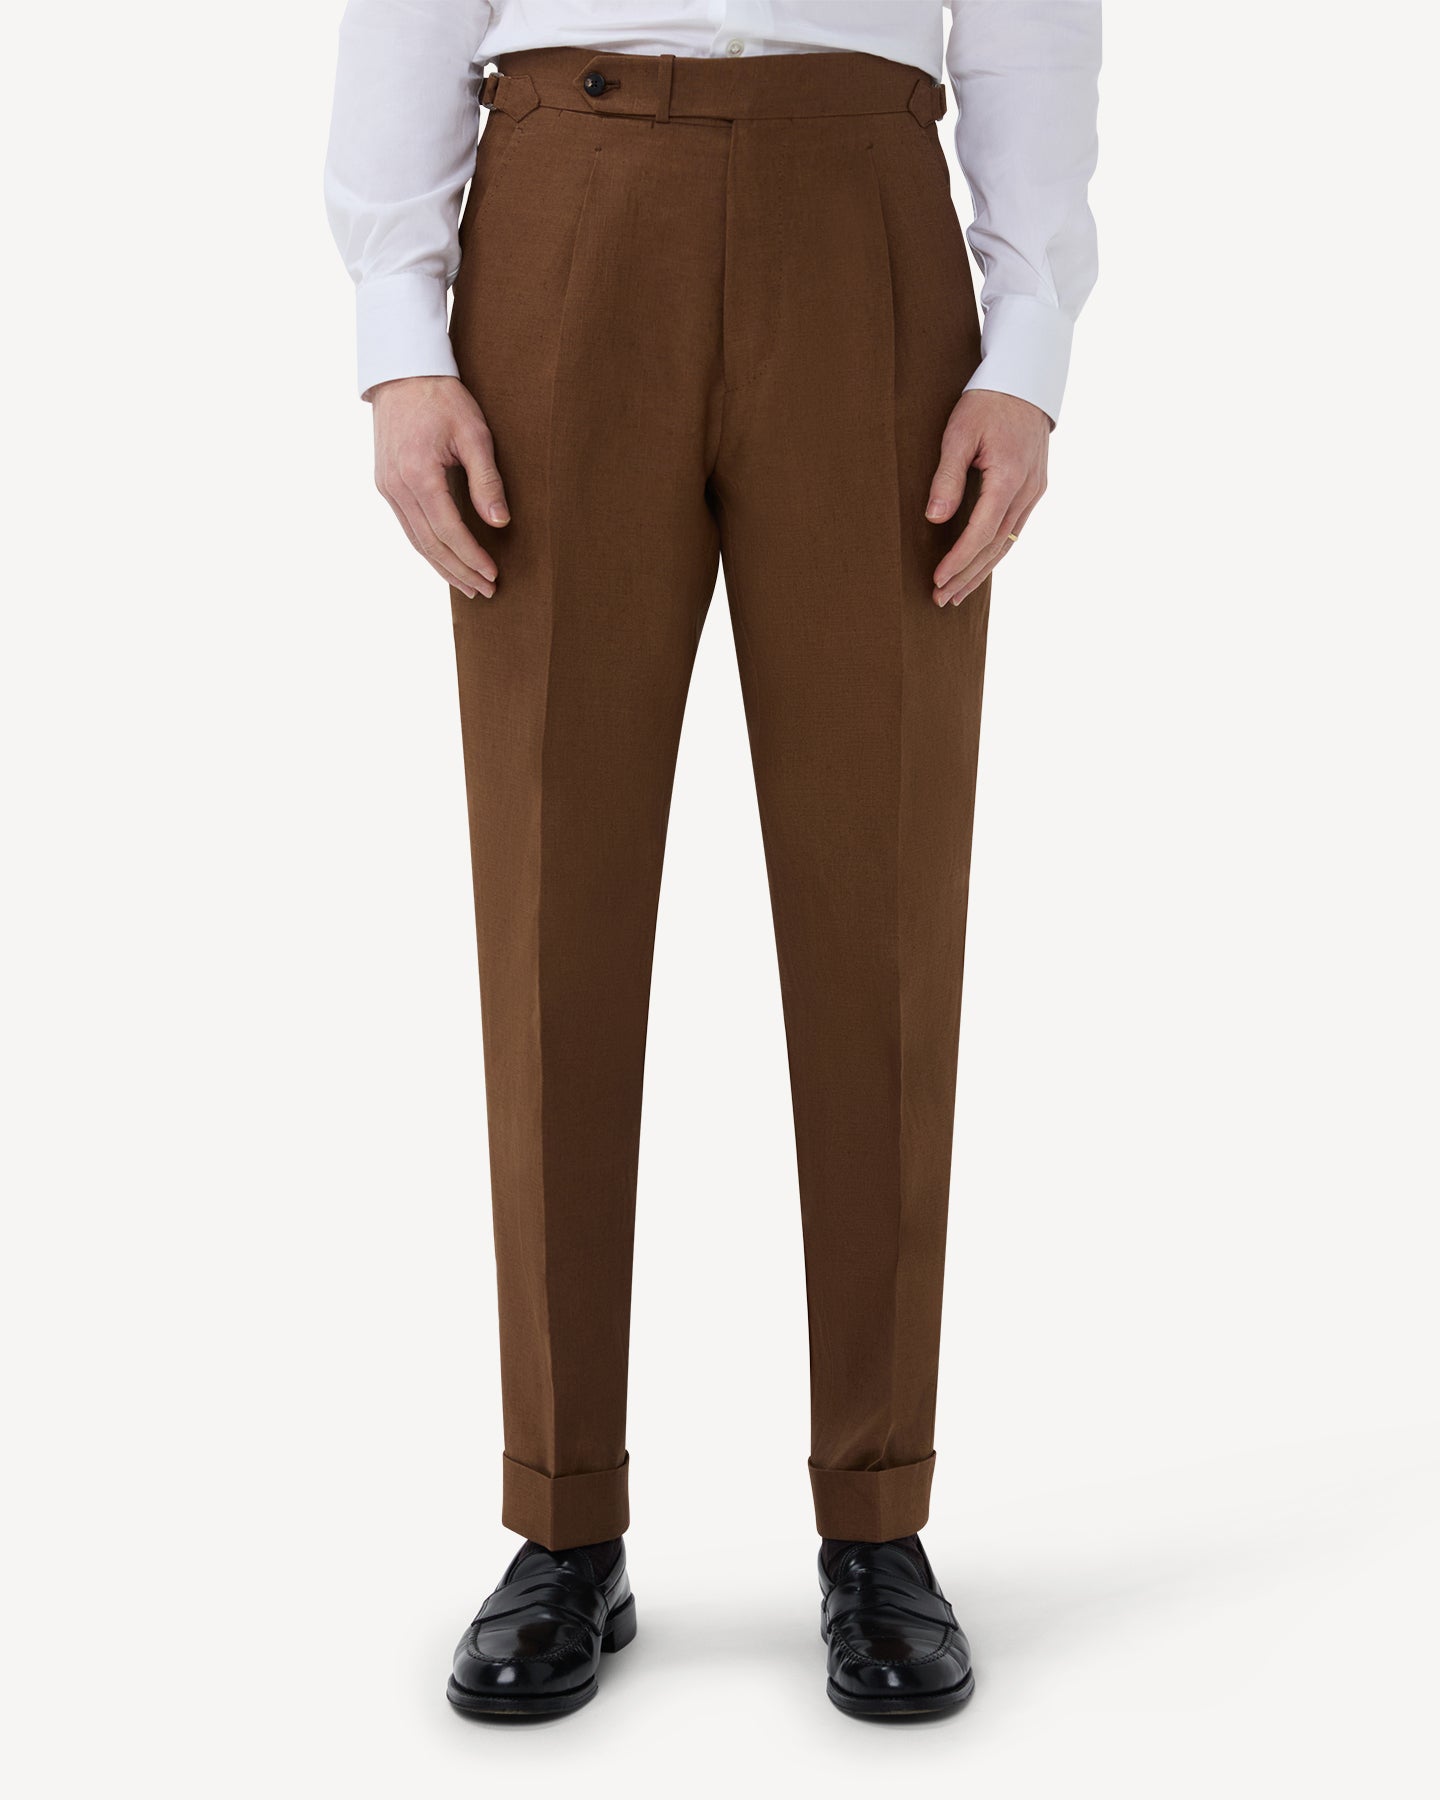 The front of dark tan linen trousers with single pleats and side adjusters